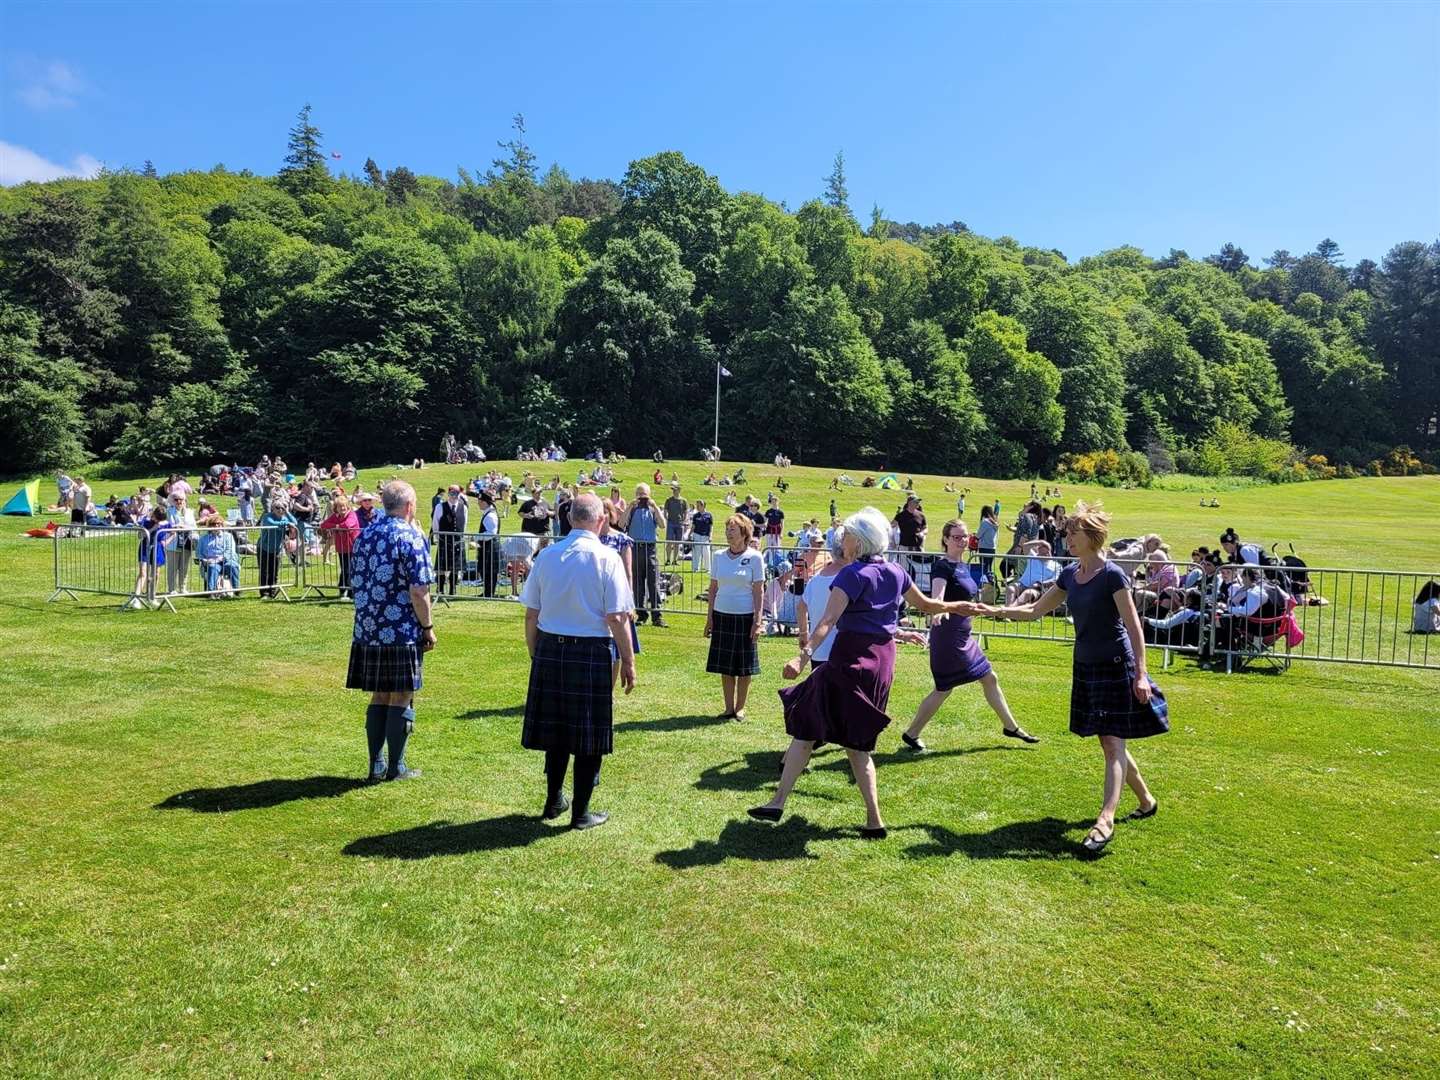 A demonstration from the Royal Scottish Country Dance Society.